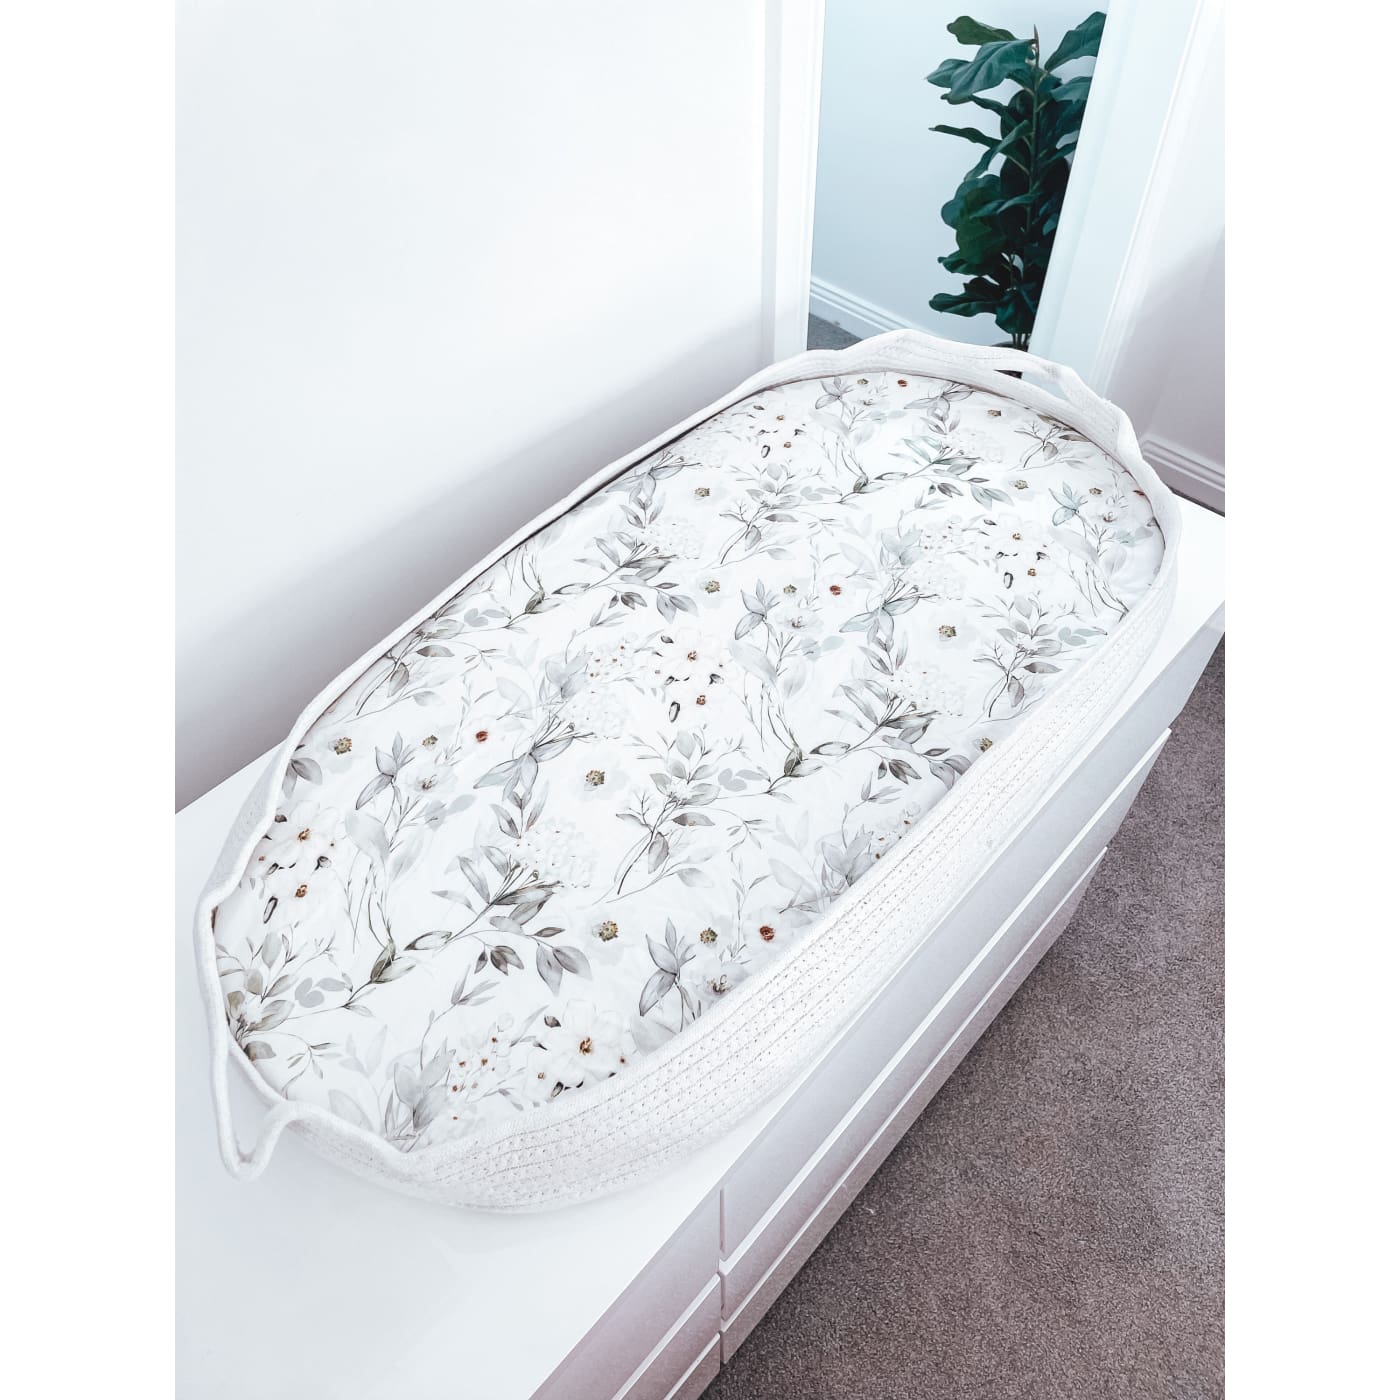 Lil Miimie Jersey Cotton Bassinet Sheet/Change Mat Cover - White Floral - NURSERY & BEDTIME - BASS/CRADLE/COSLEEP MANCHESTER